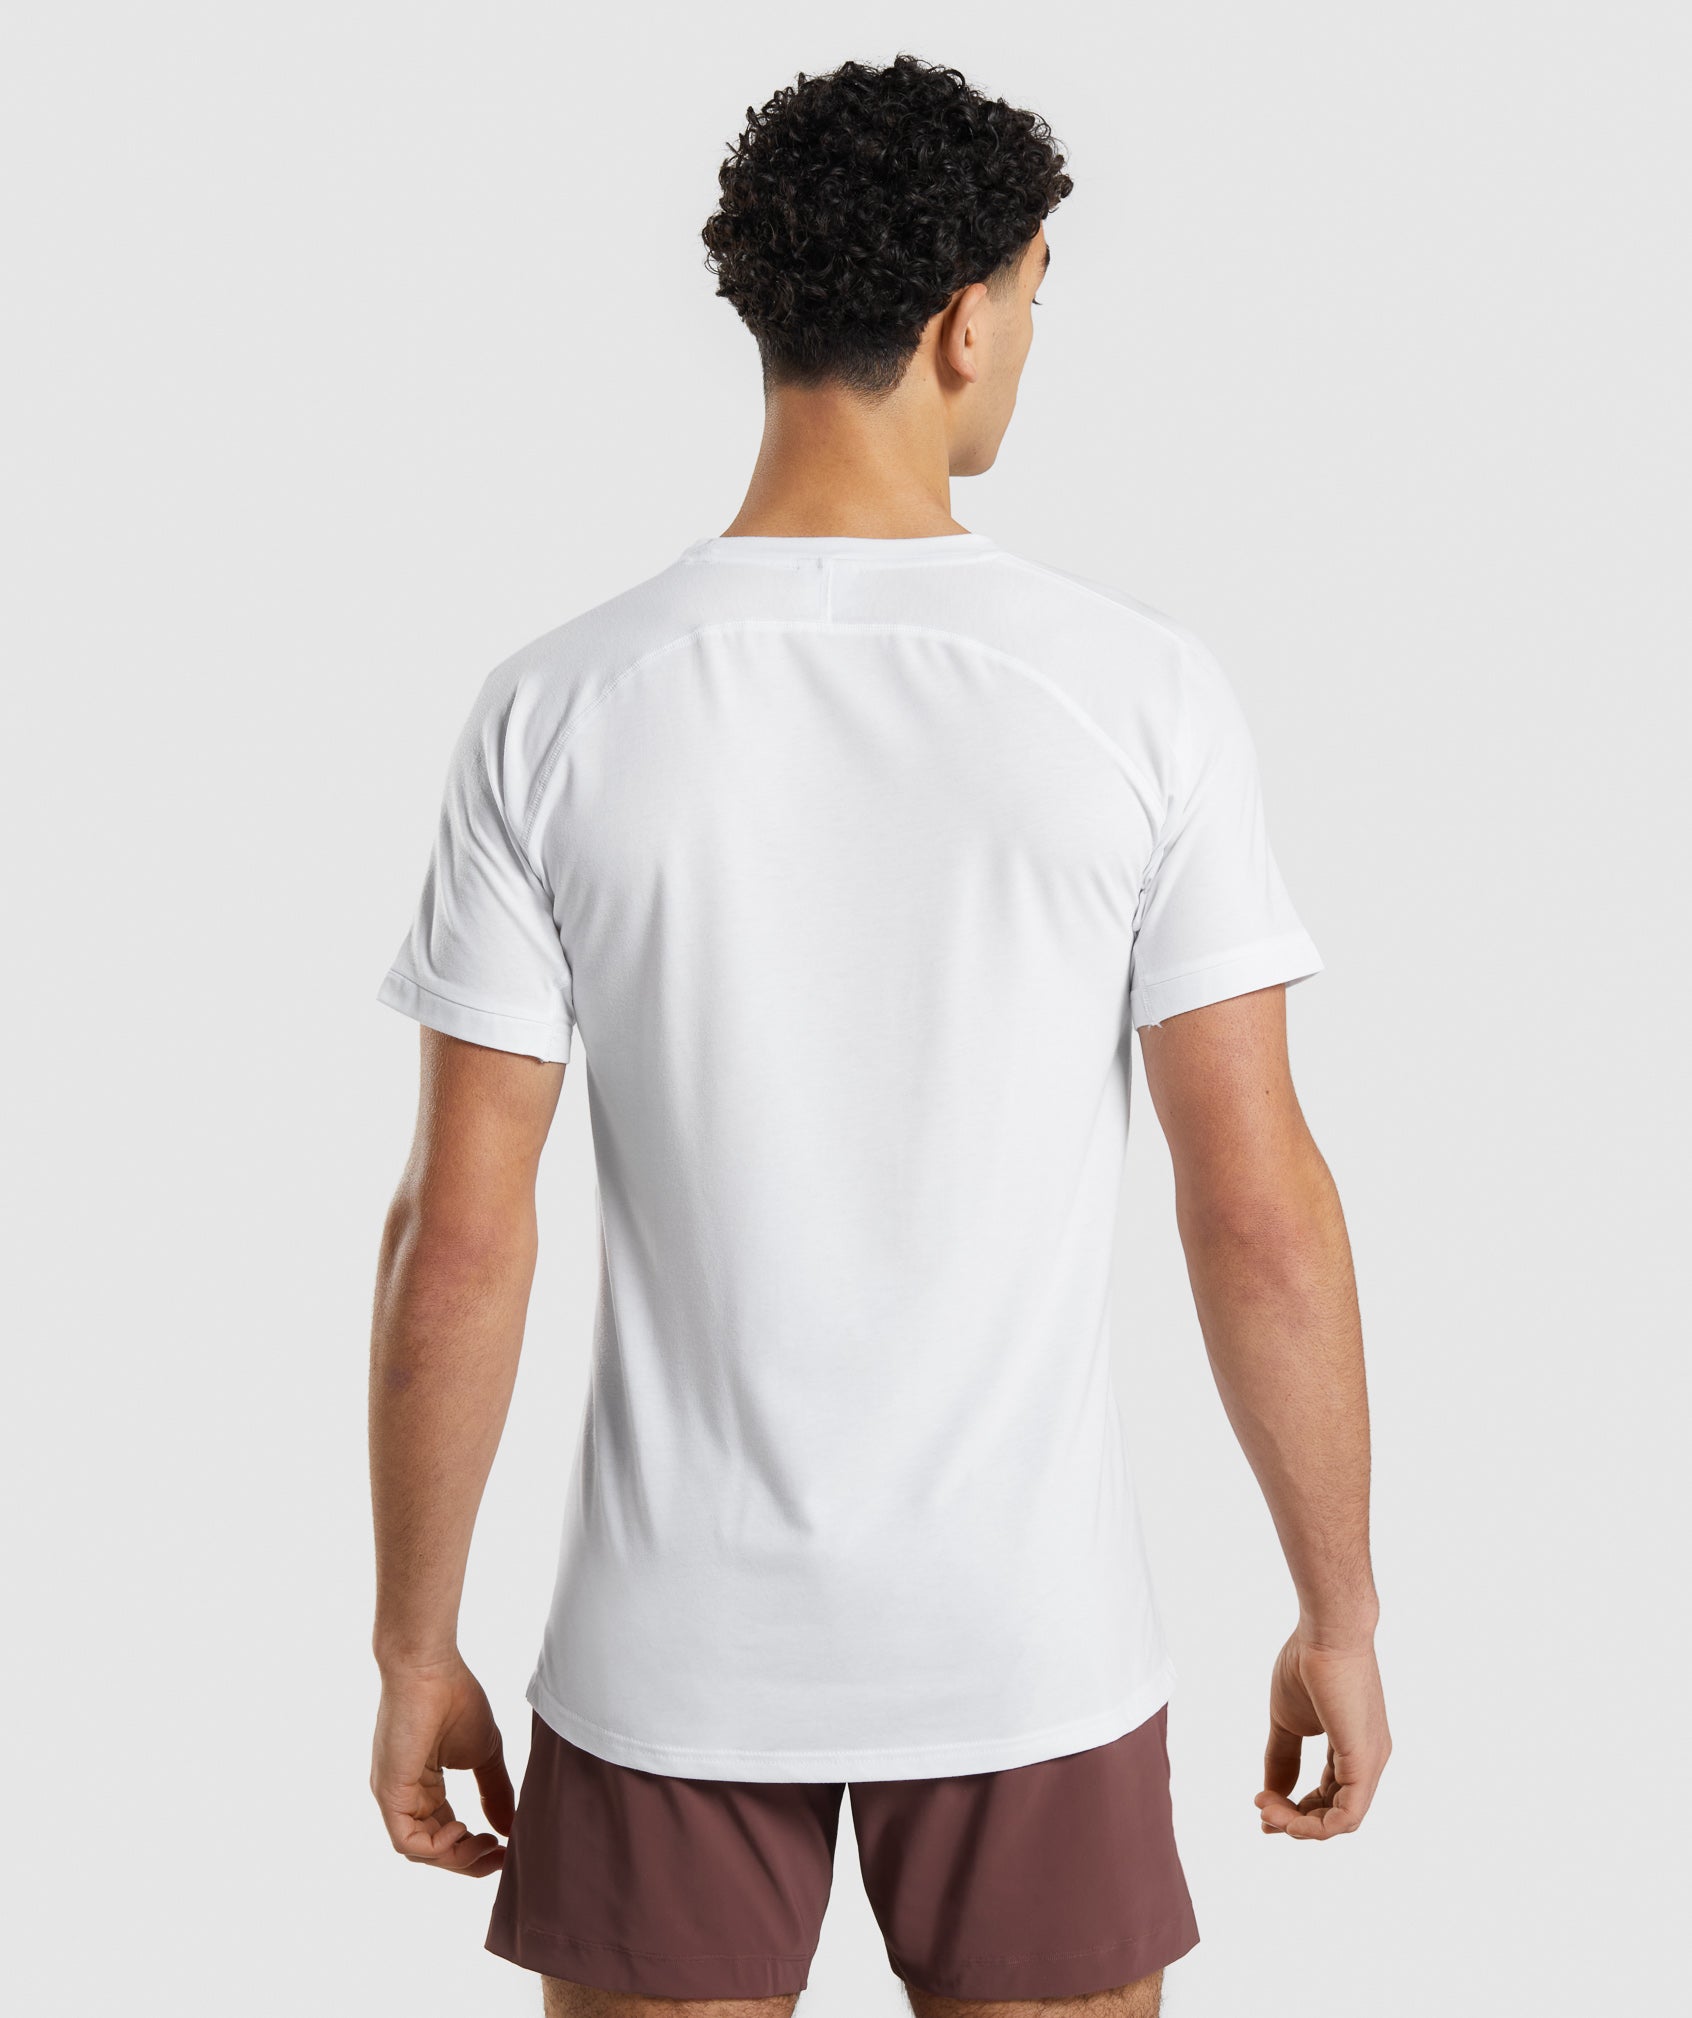 Studio Amplify T-Shirt in White - view 2